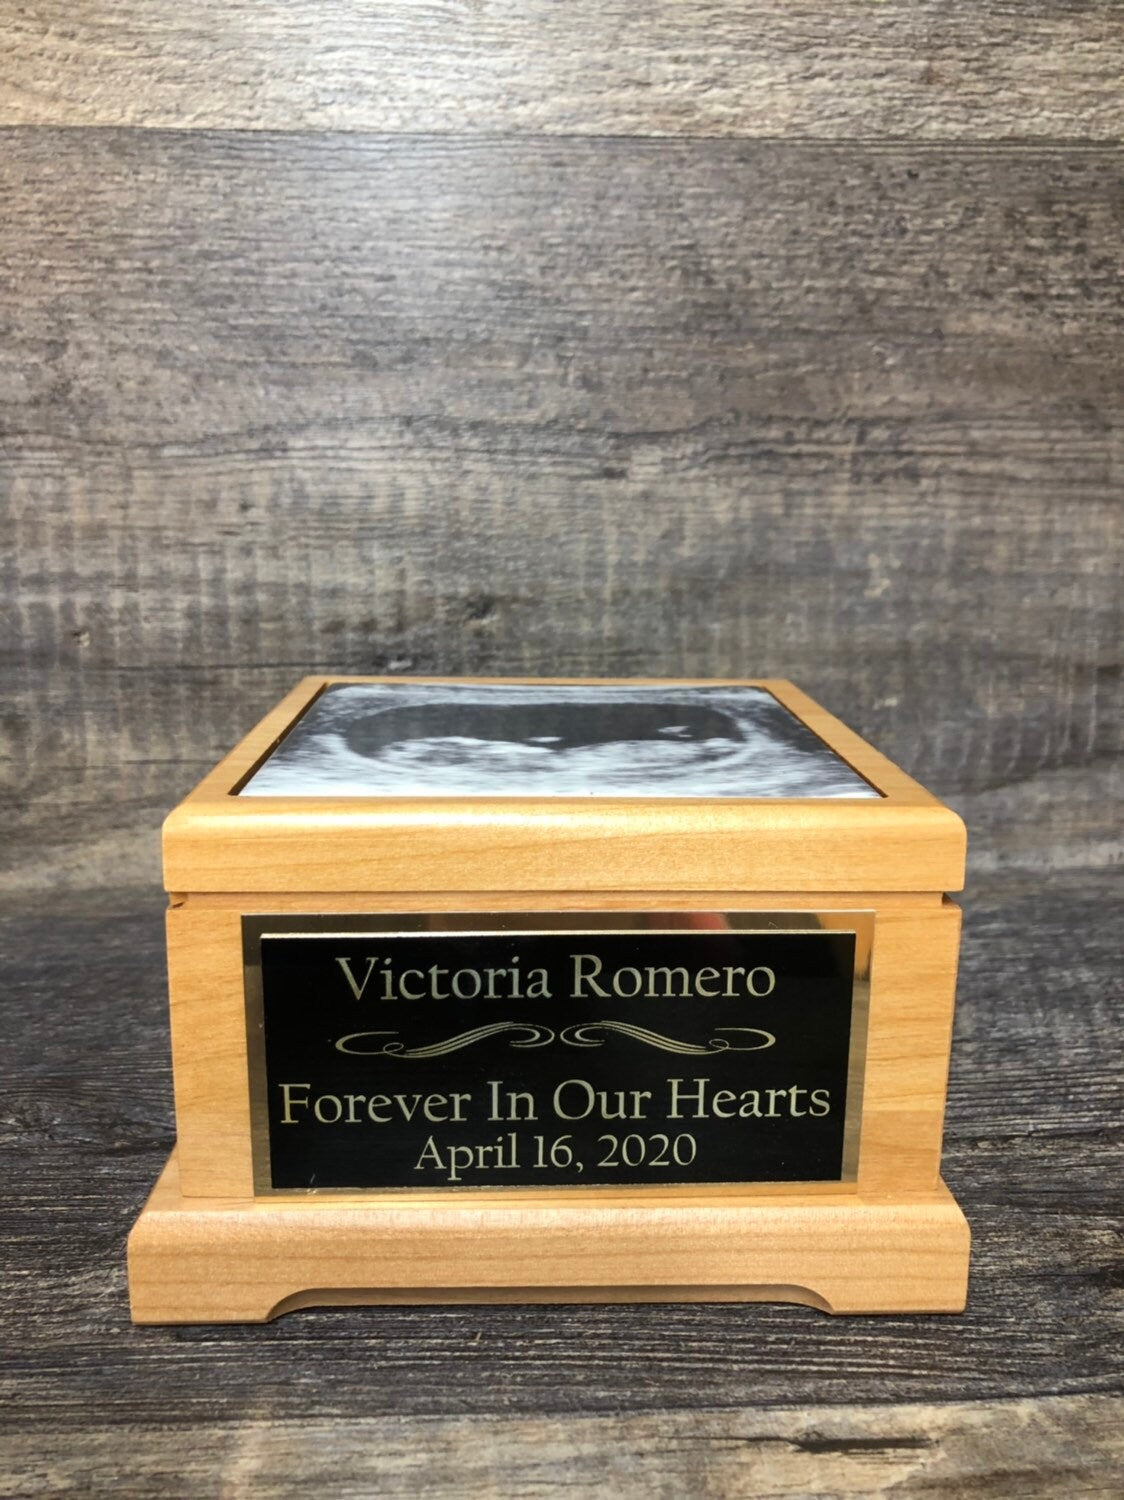 Miscarriage Urn Ultrasound Photo Cremation Urn Baby Urn For Ashes Infant Urn Tile & Personalized Engraved Tag Memorial